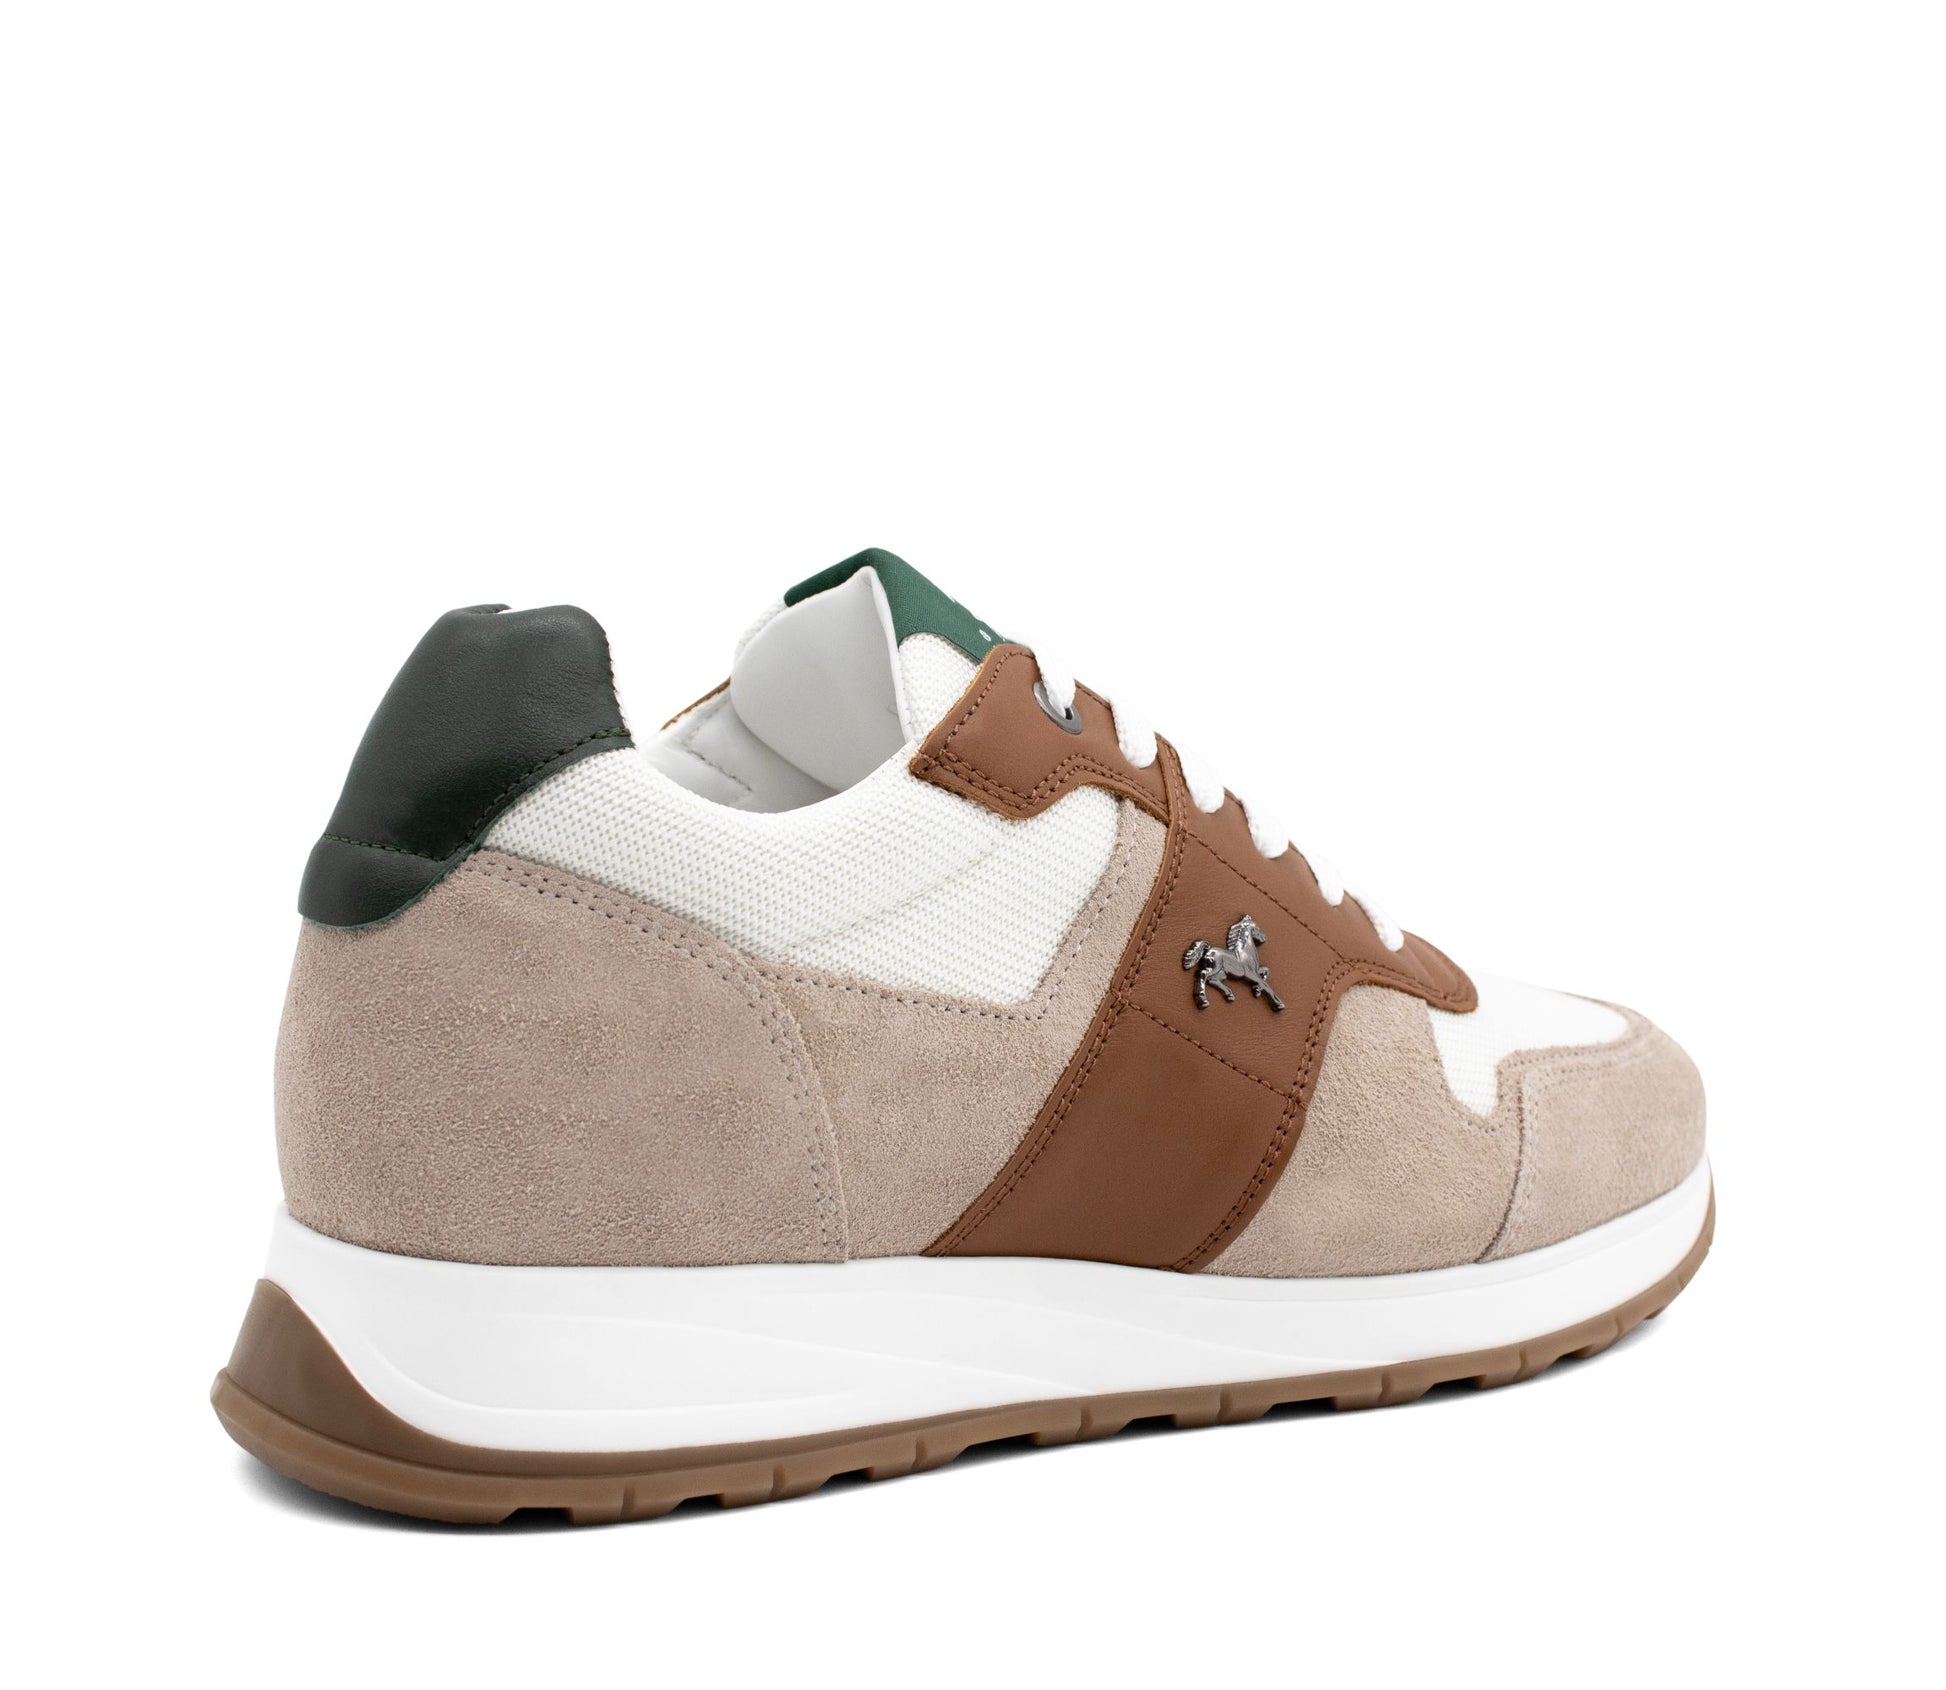 #color_ Beige | Cavalinho Cheval Casual Leather Sneakers - Beige - 48130105.31_3